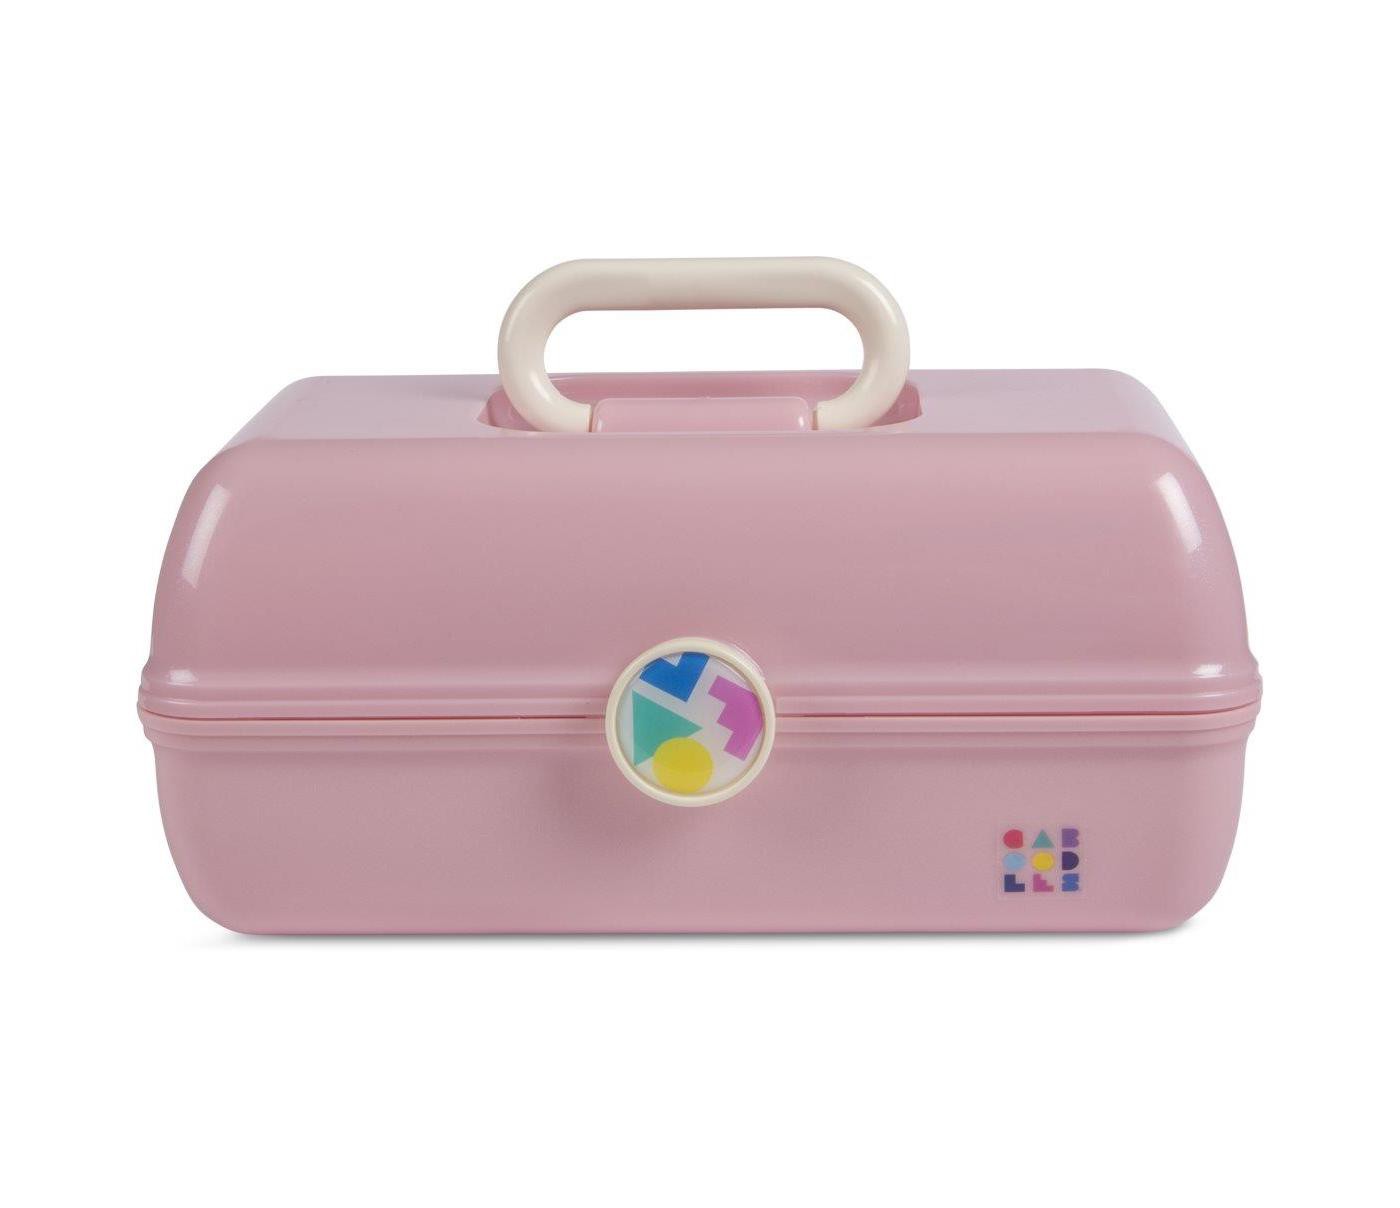 Caboodles Classic Caboodles On the Go Girl Case Millennial Pink - image 2 of 3